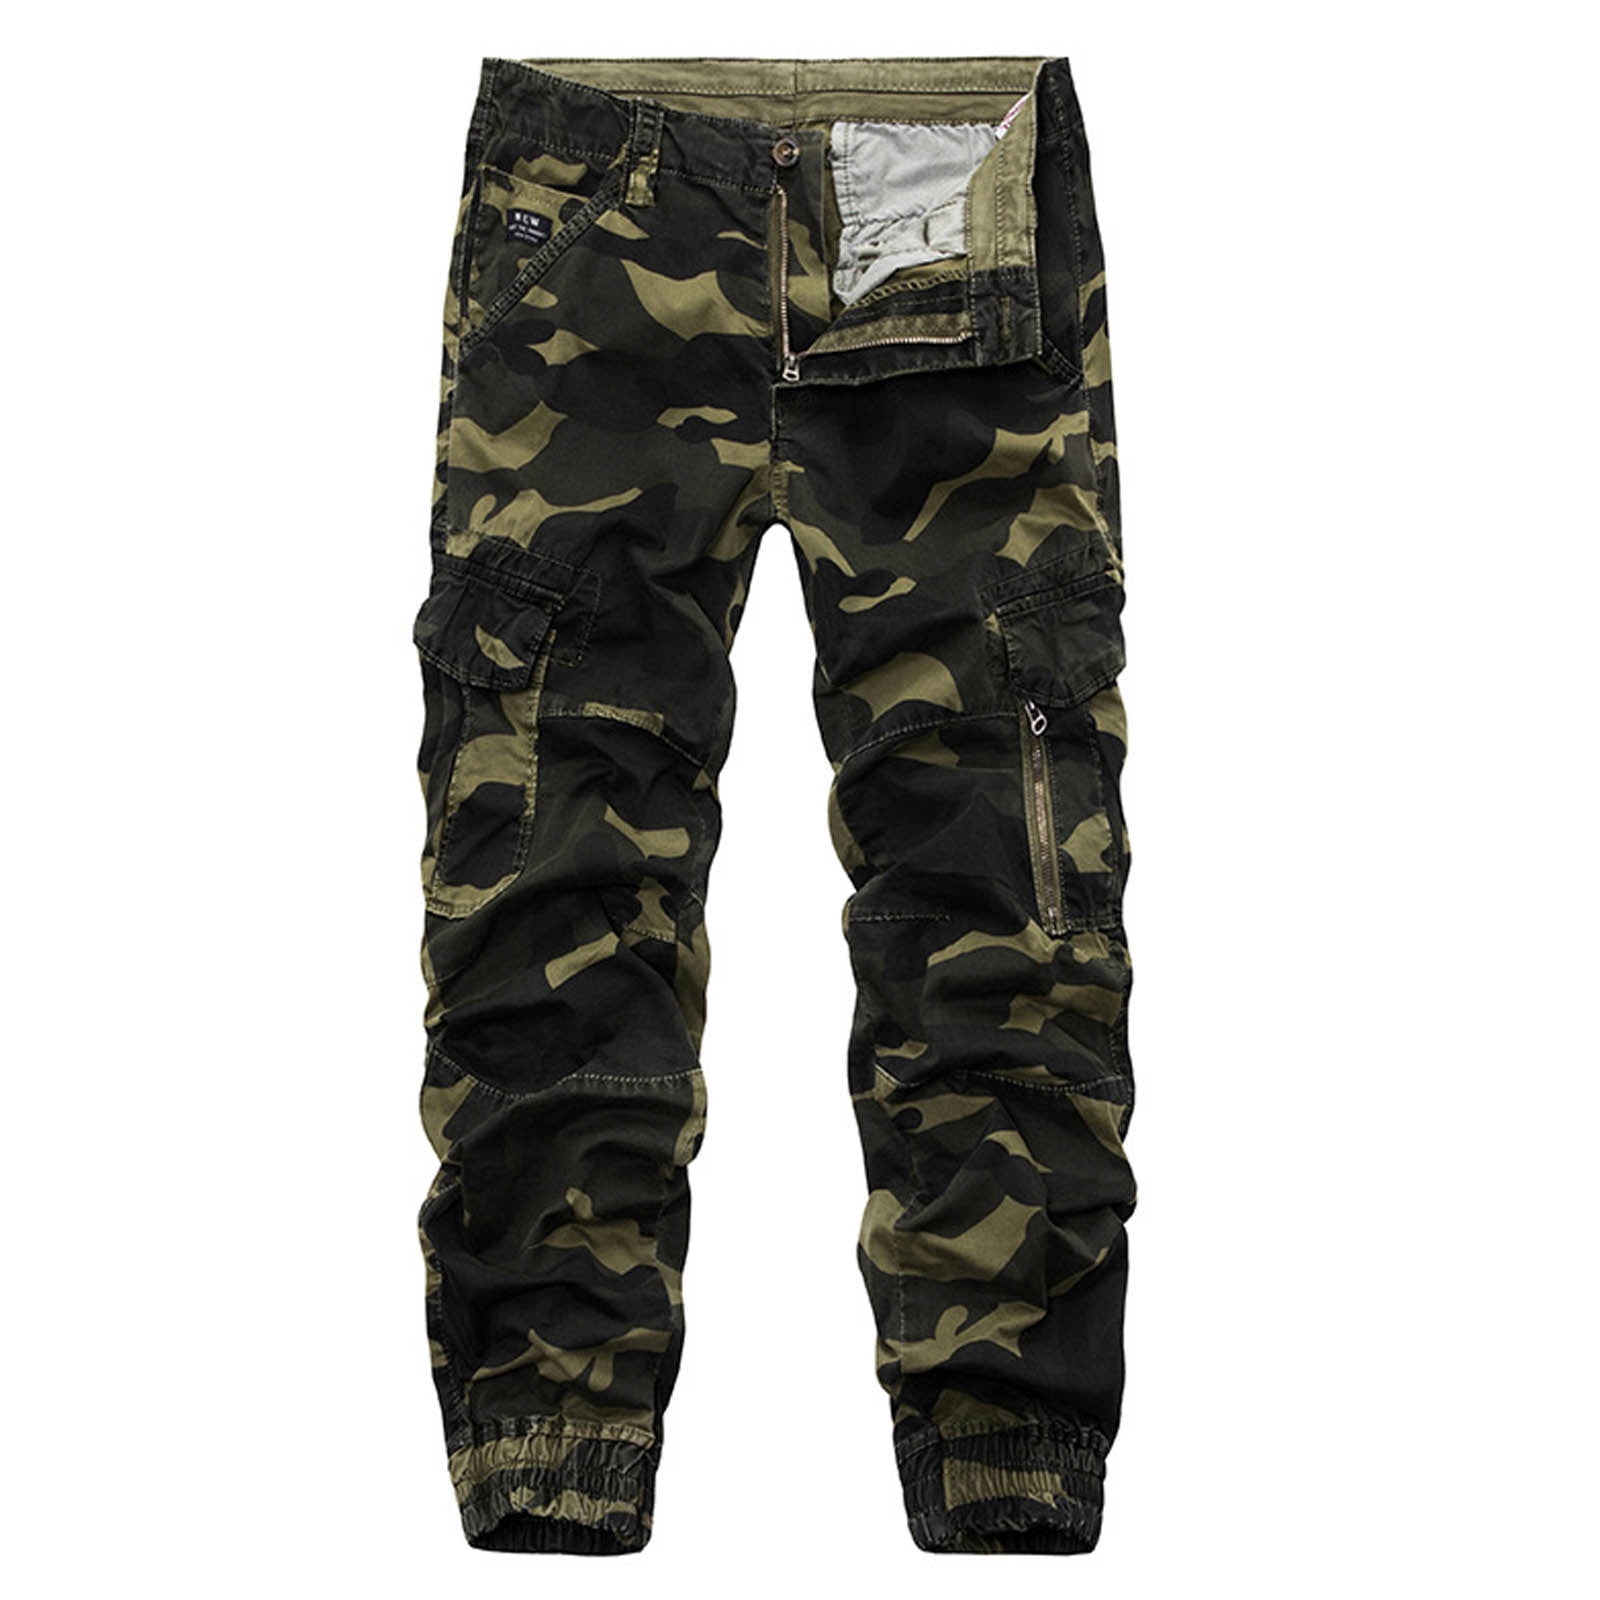 Military Tactical Baggy Cargos Mens For Men With Multiple Pockets Ideal For  SWAT, Combat, Army, And Casual Fashion From Tomwei, $23.4 | DHgate.Com